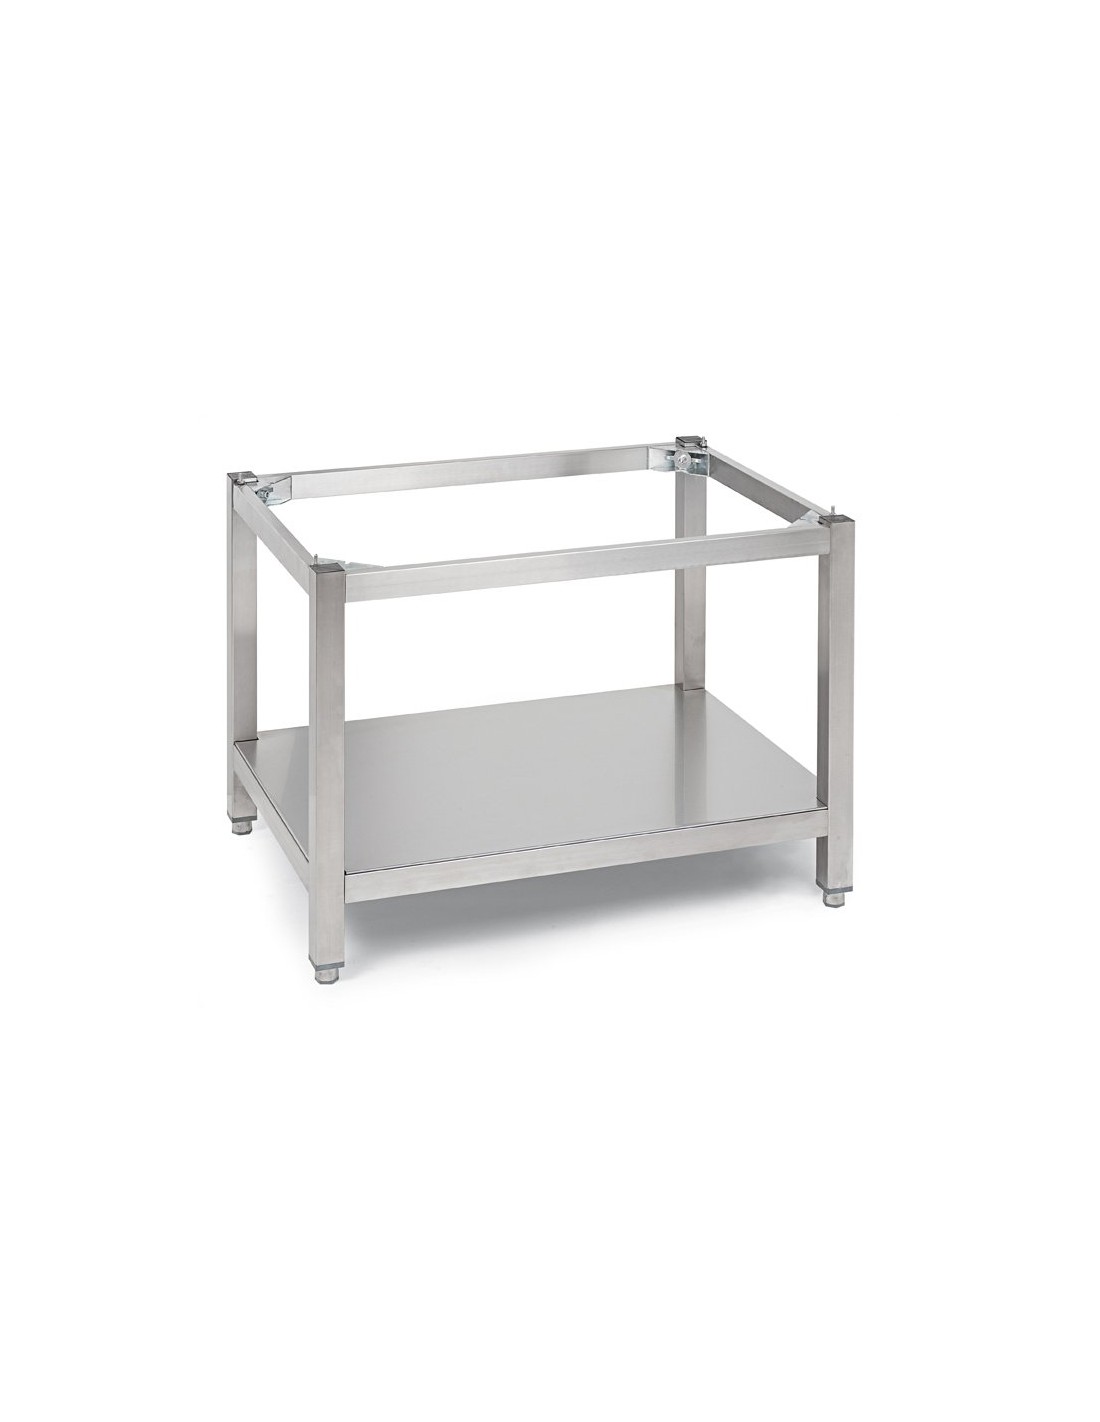 Stainless steel stand - Open with lower shelf